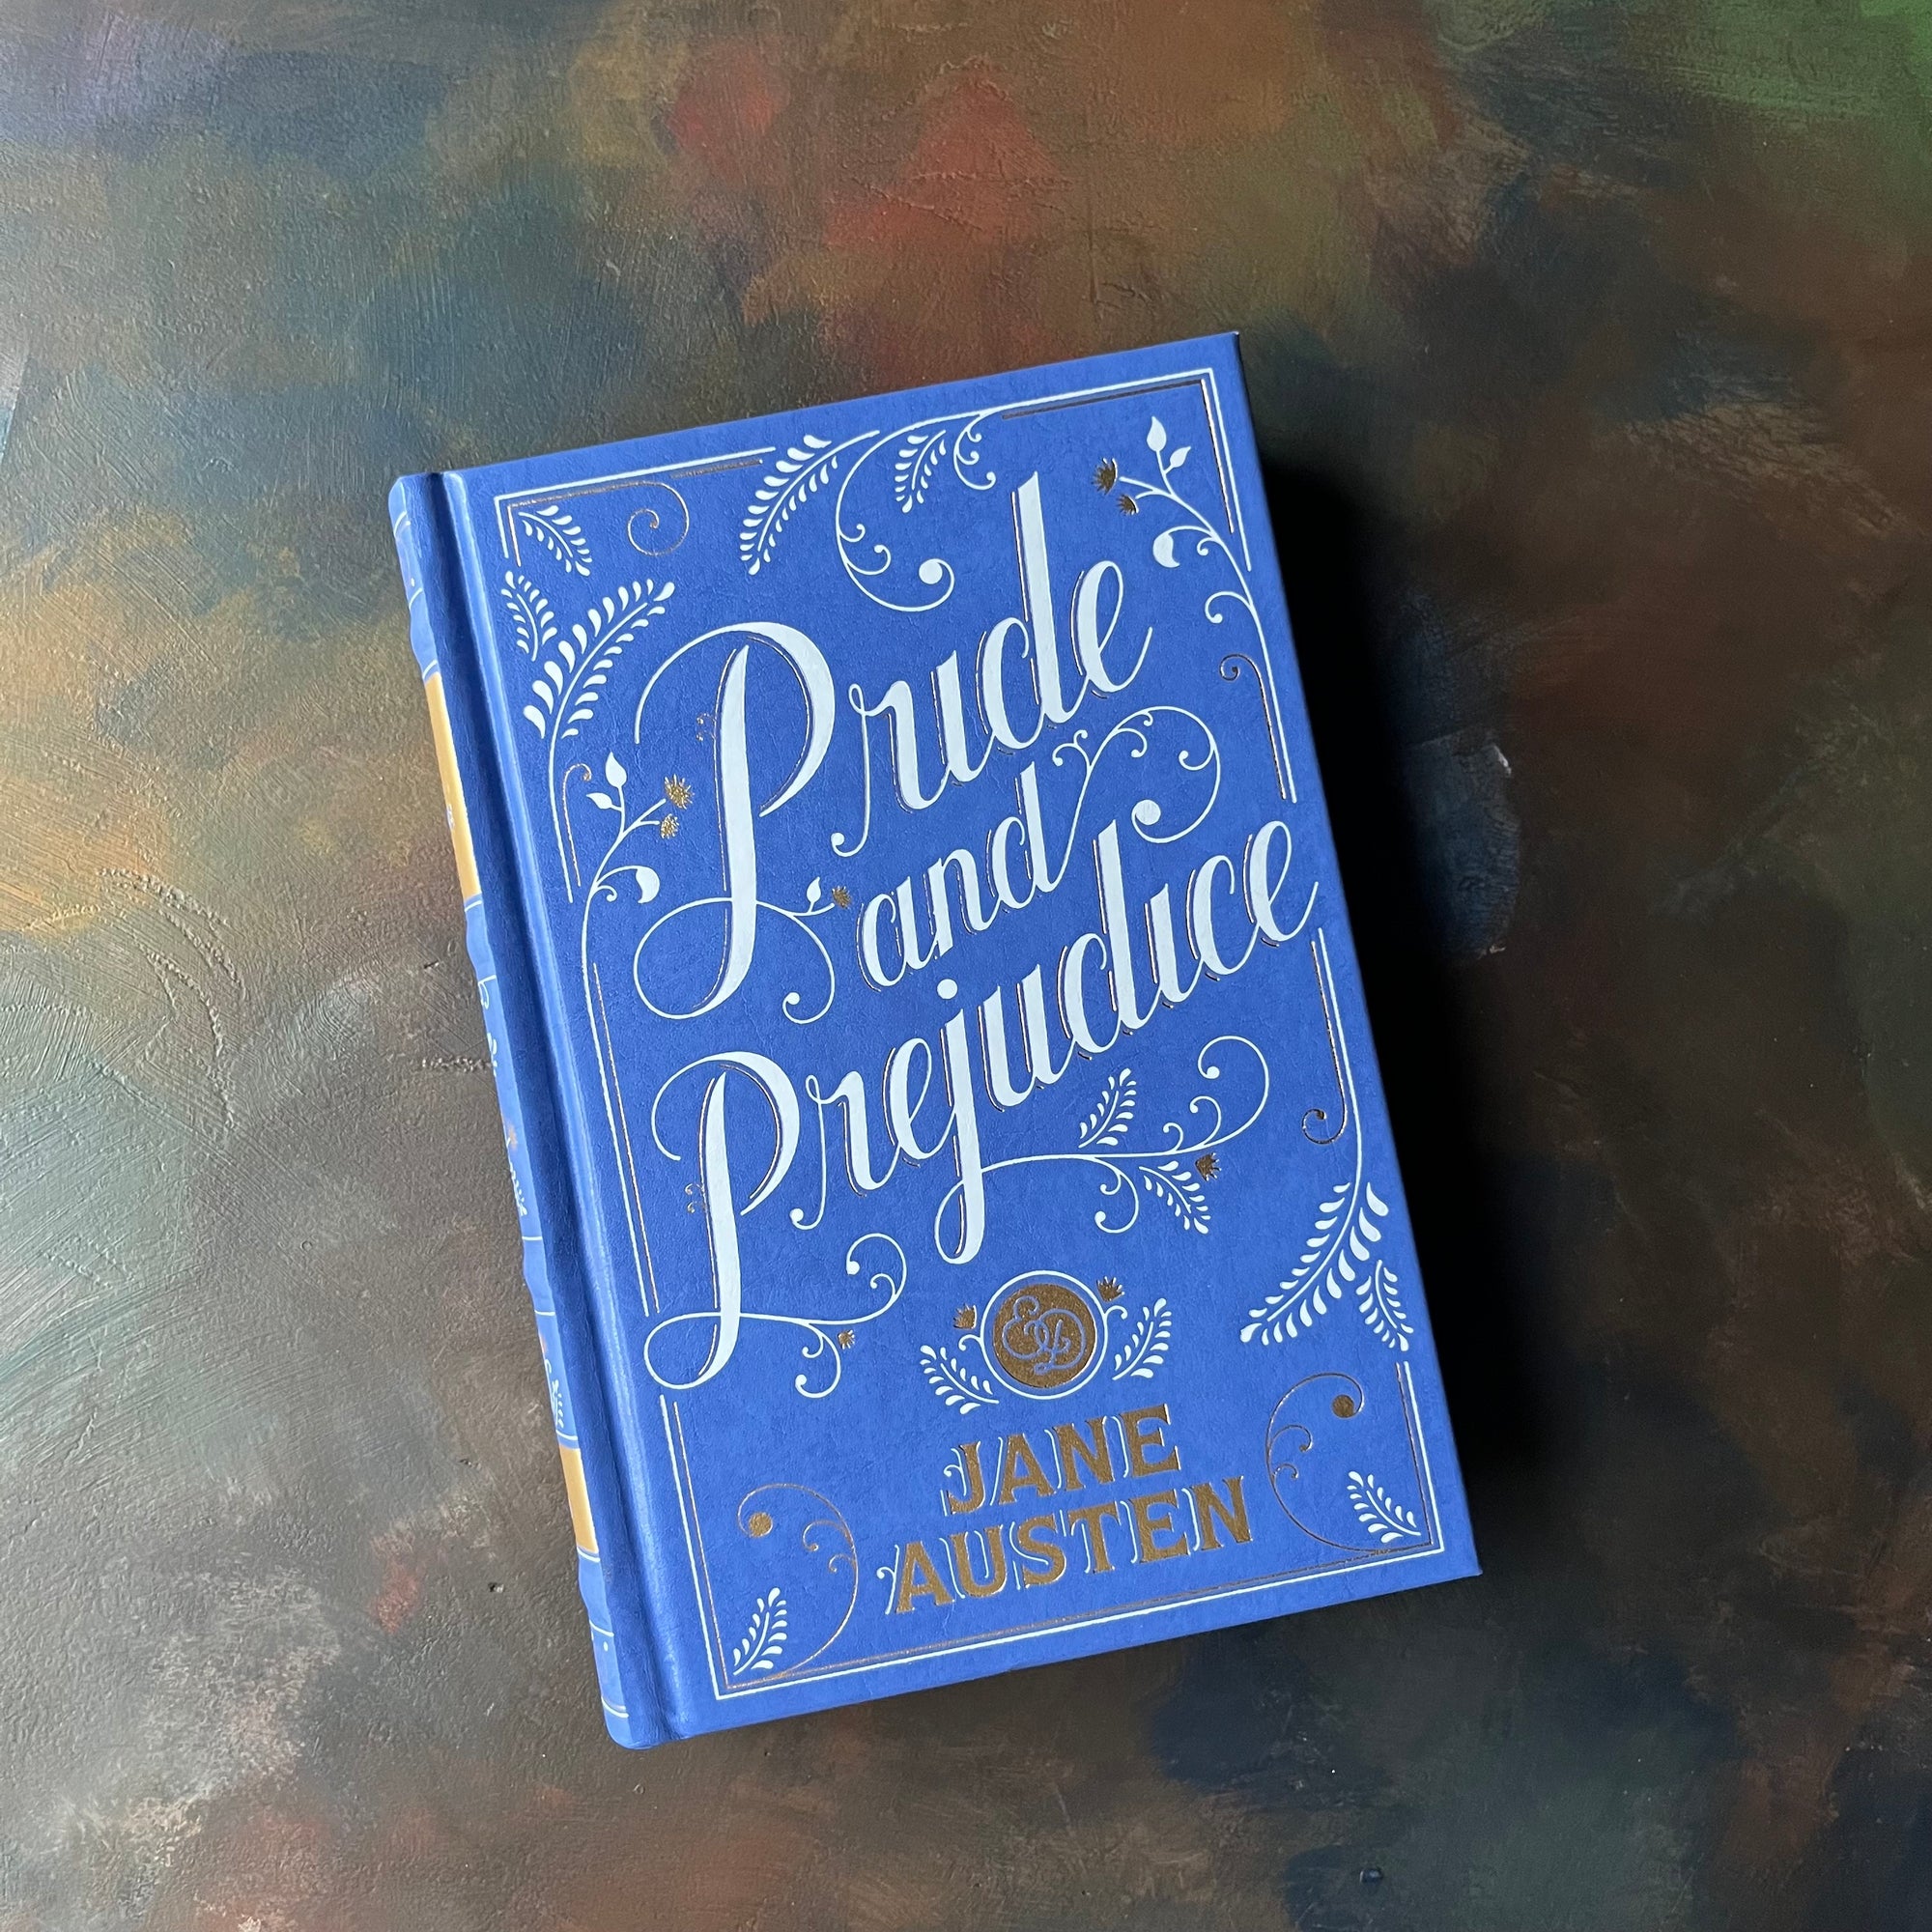 Pride and Prejudice written by Jane Austen-2011 Barnes & Noble Edition-classic literature in a modern edition-view of the front cover in blue, white and gold design